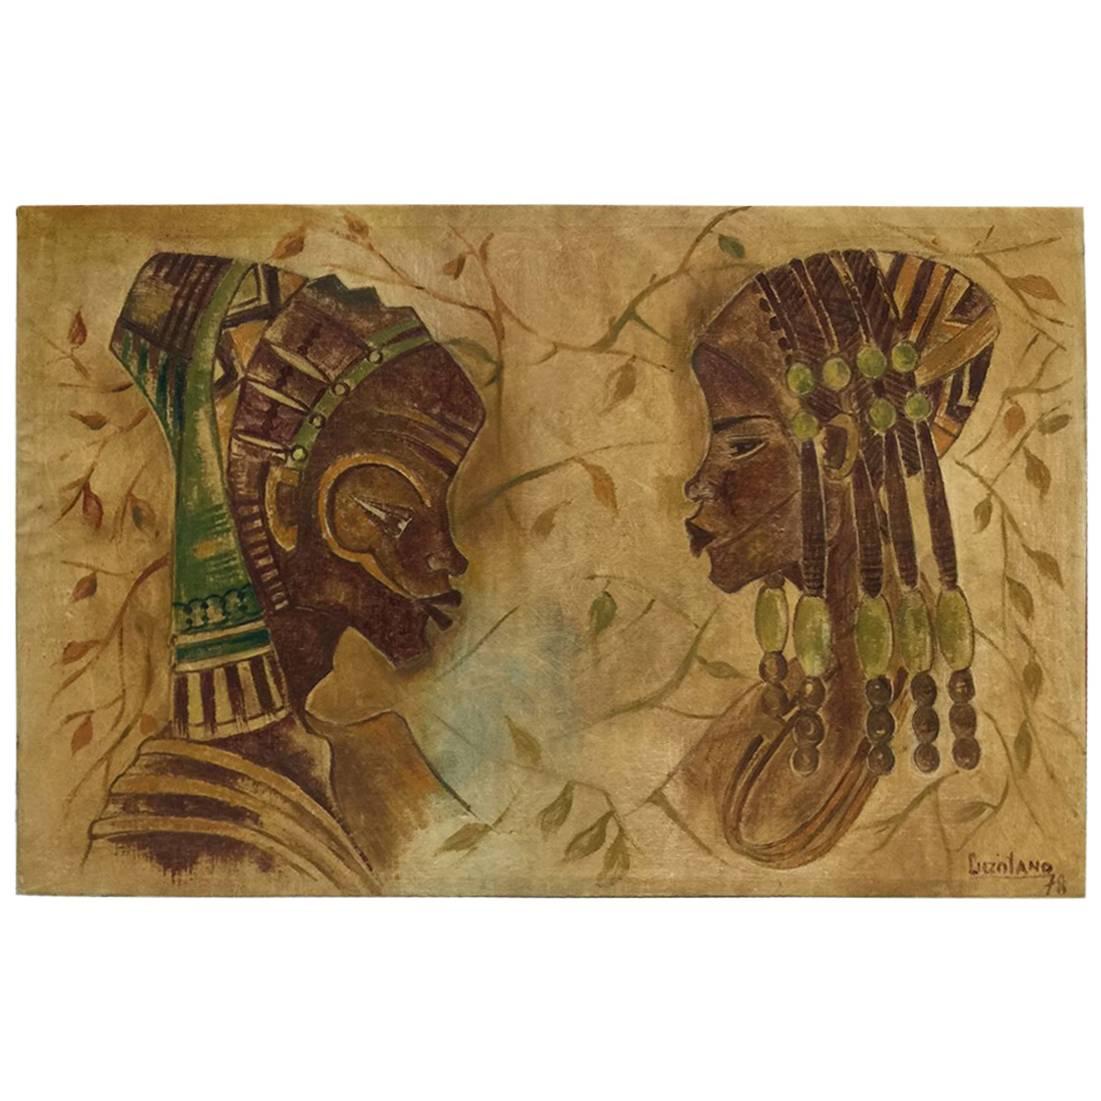 African Art by Luzolano, Oil Painting, 1978 For Sale